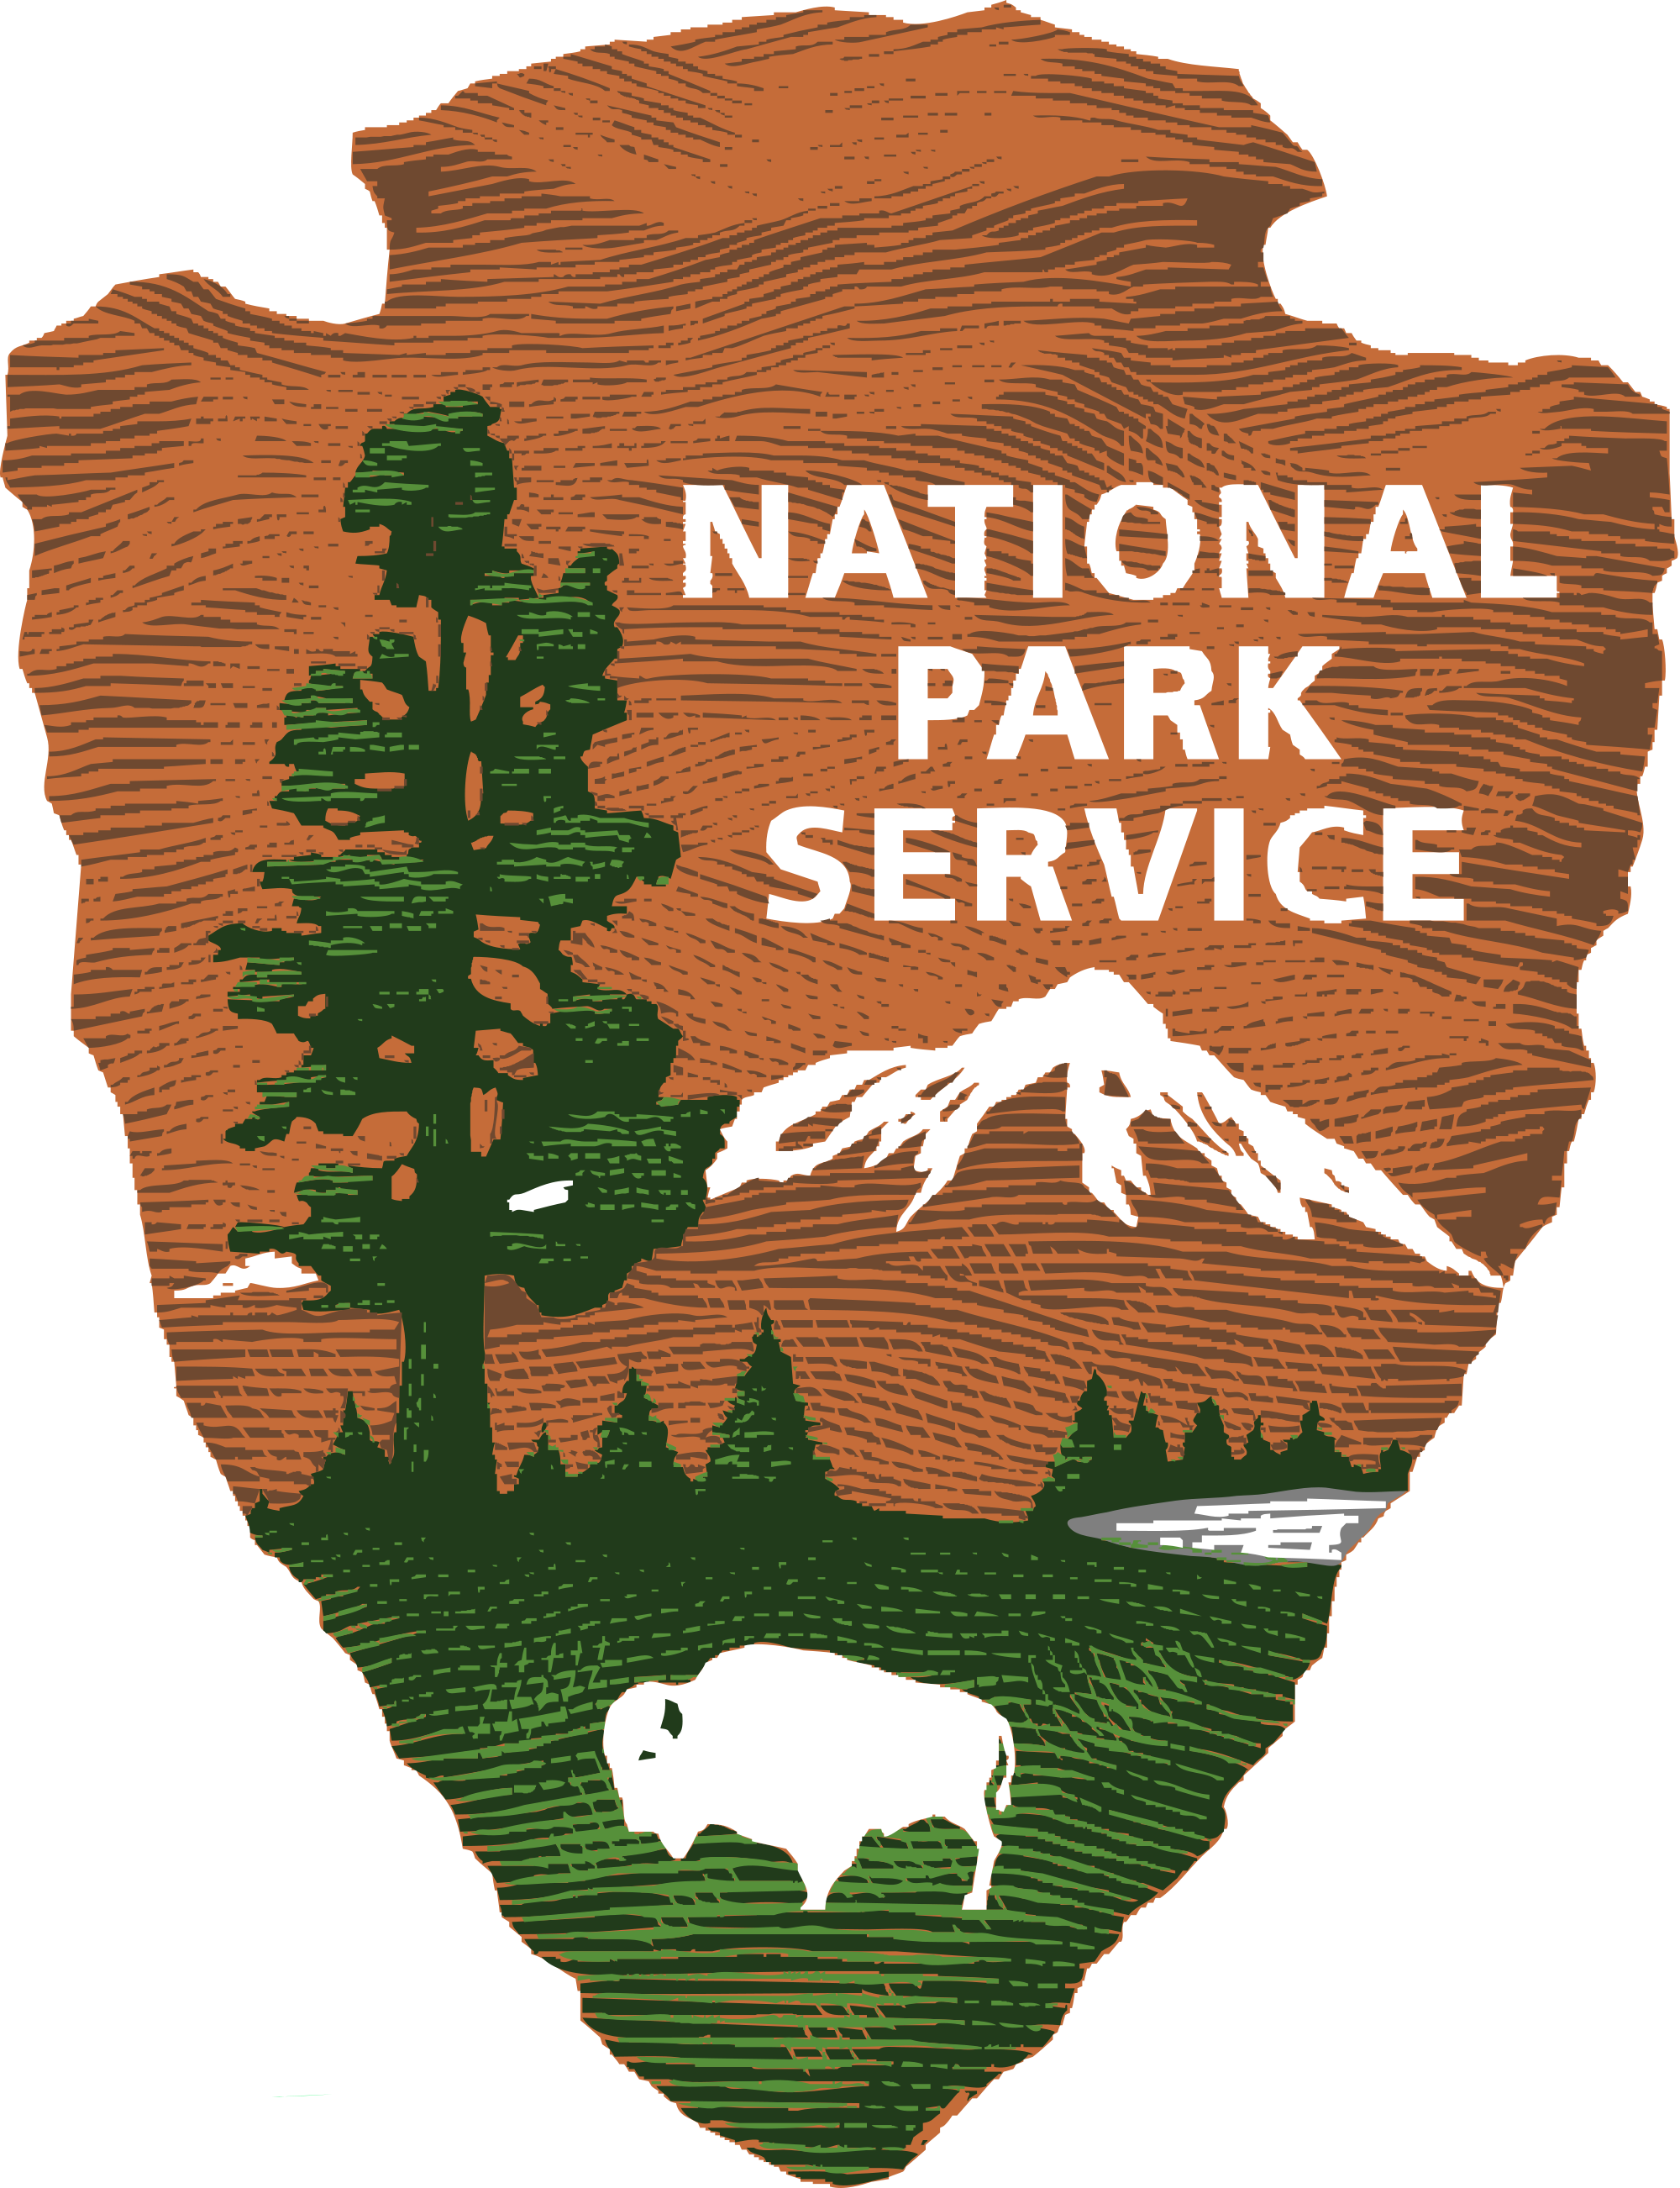 National Park Service Arrowhead with the various symbols including the Sequoia, Bison, Lake, Mountain and Arrowhead itself.